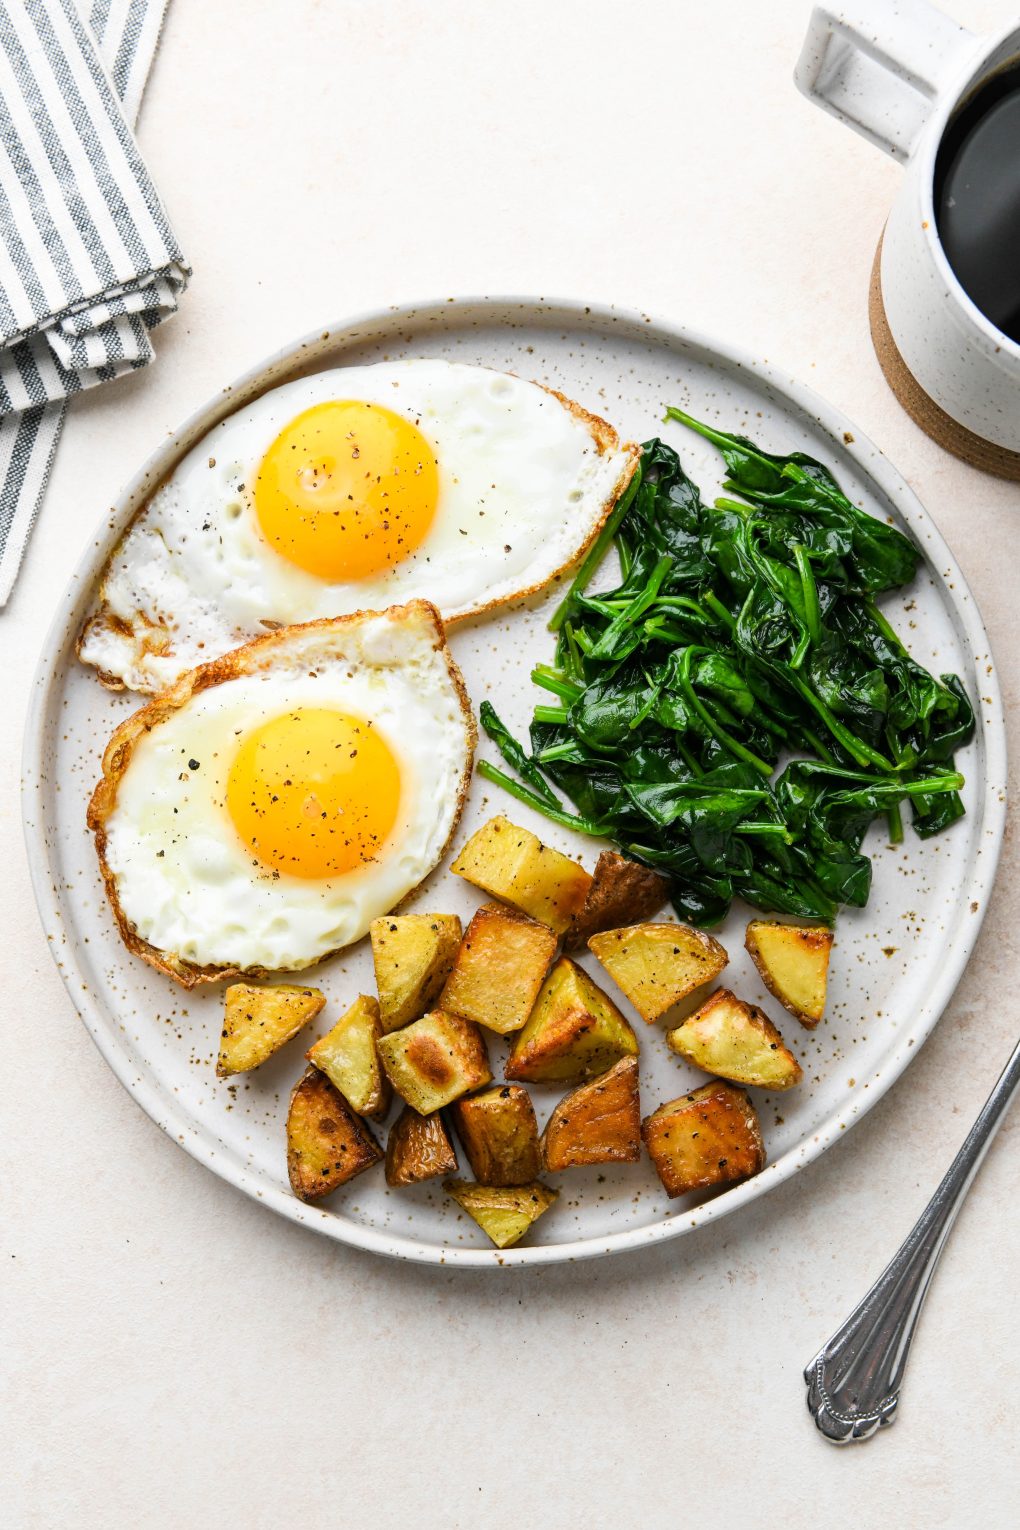 Whole30 breakfast on a speckled plate: Sunny side up fried eggs, sautéed spinach, and roasted potatoes.